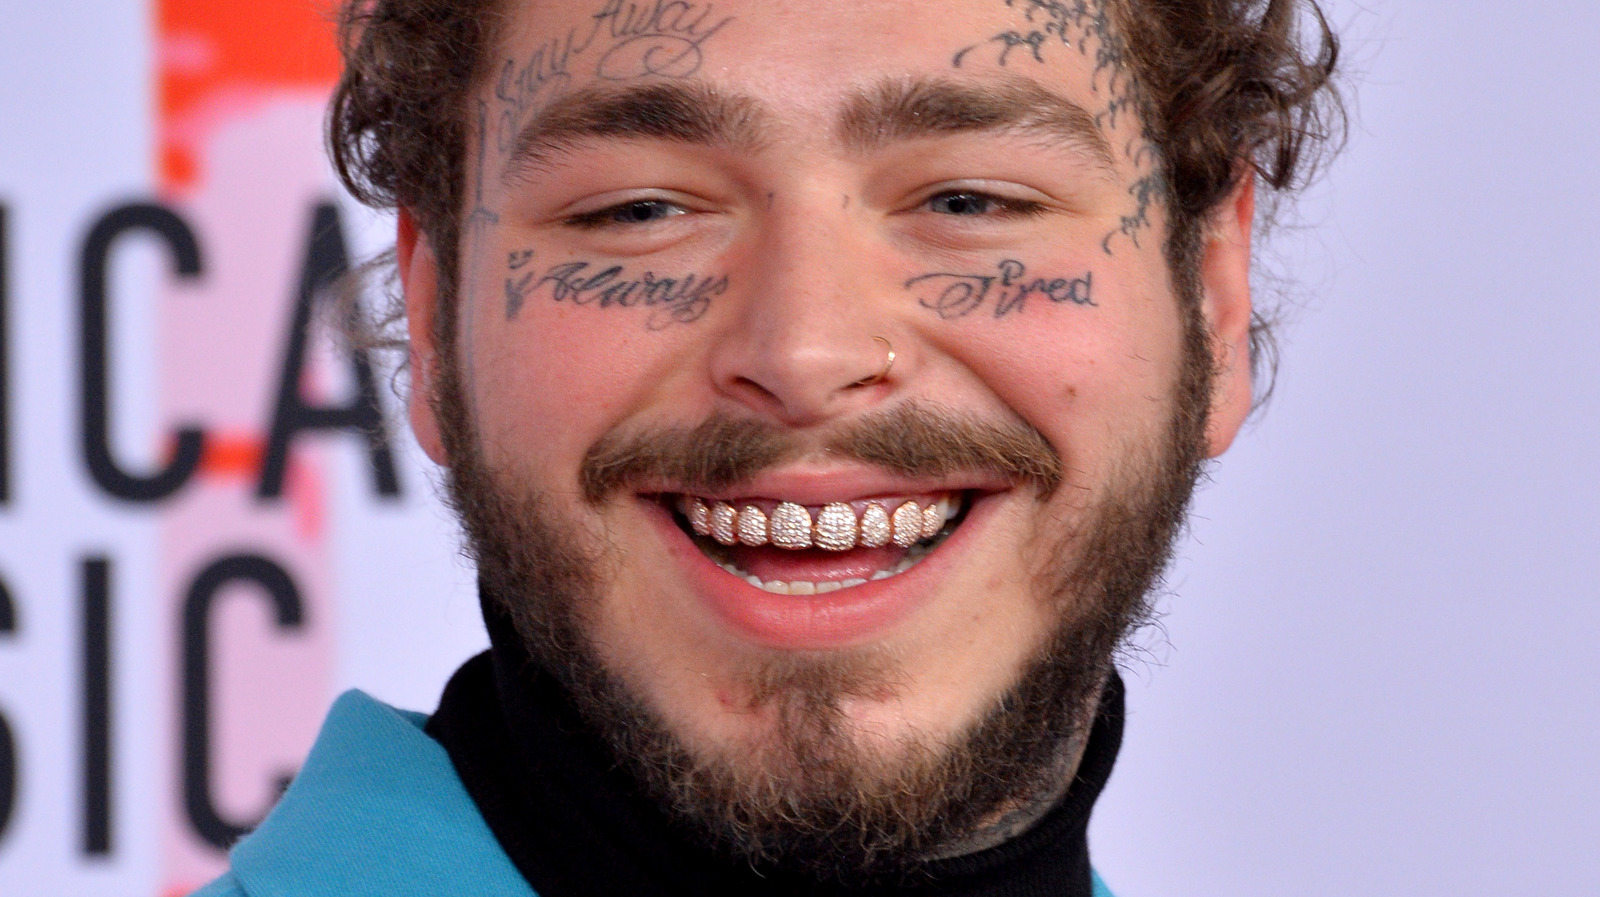 Post Malone Announces Concerning Health Troubles After Onstage Fall